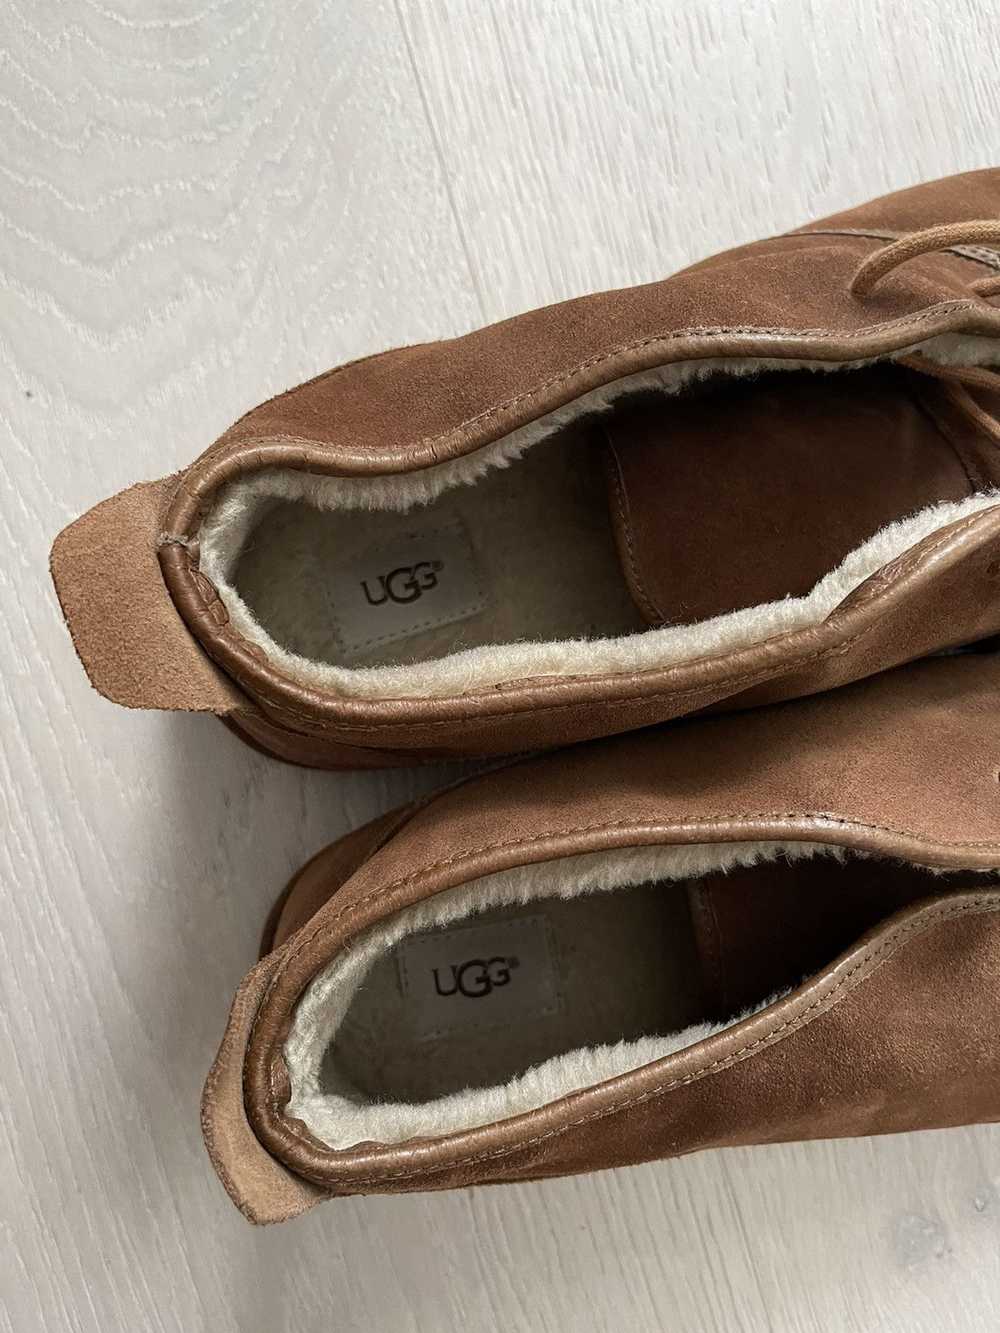 Ugg SIZE 18 UGG Low Top Slippers - image 6